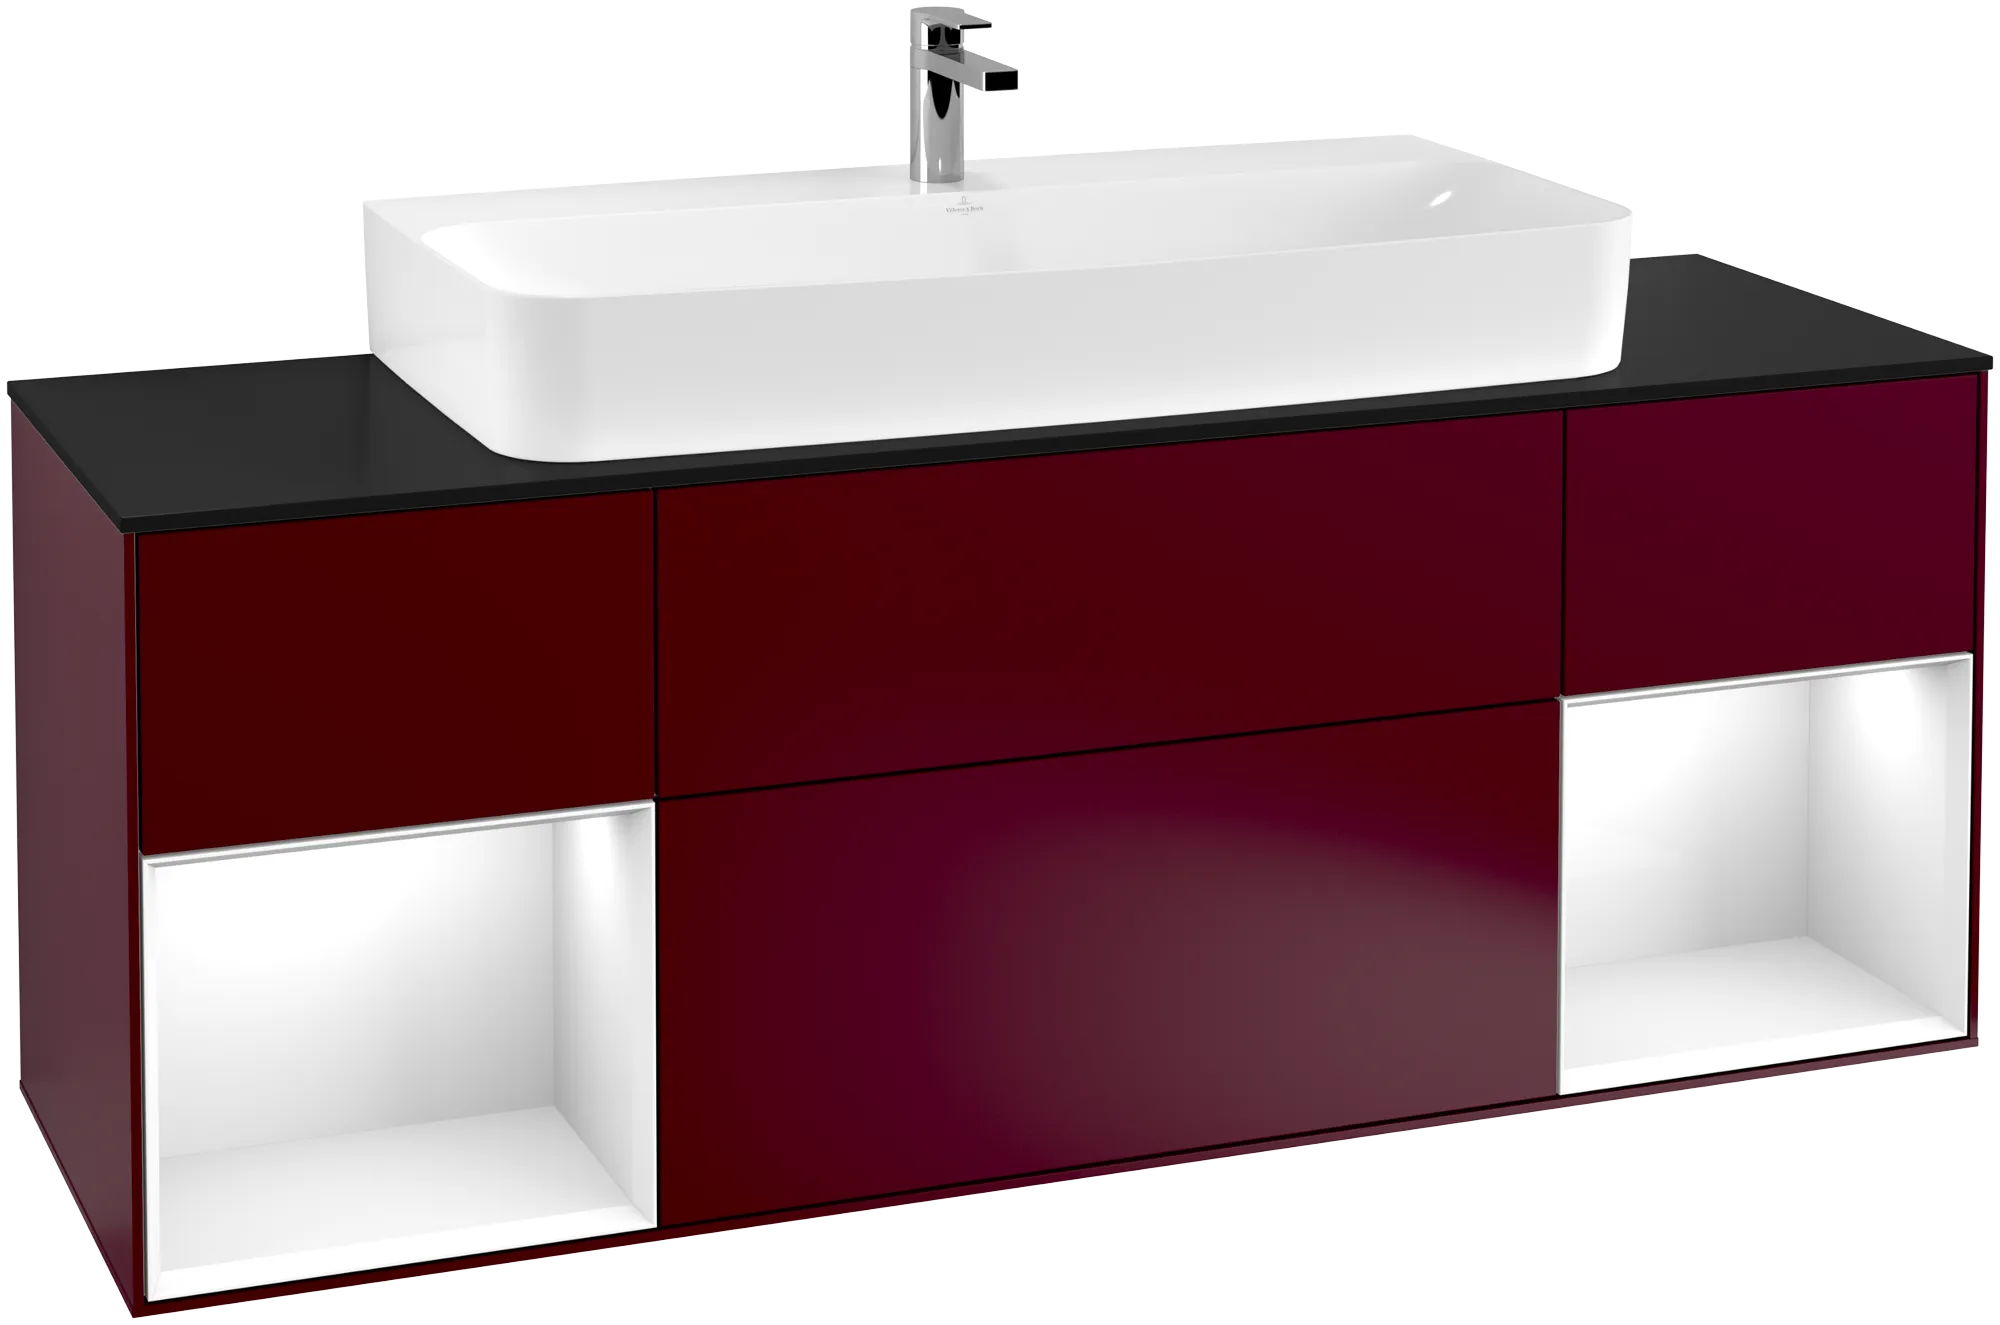 Obrázek VILLEROY BOCH Finion Vanity unit, with lighting, 4 pull-out compartments, 1600 x 603 x 501 mm, Peony Matt Lacquer / Glossy White Lacquer / Glass Black Matt #G212GFHB